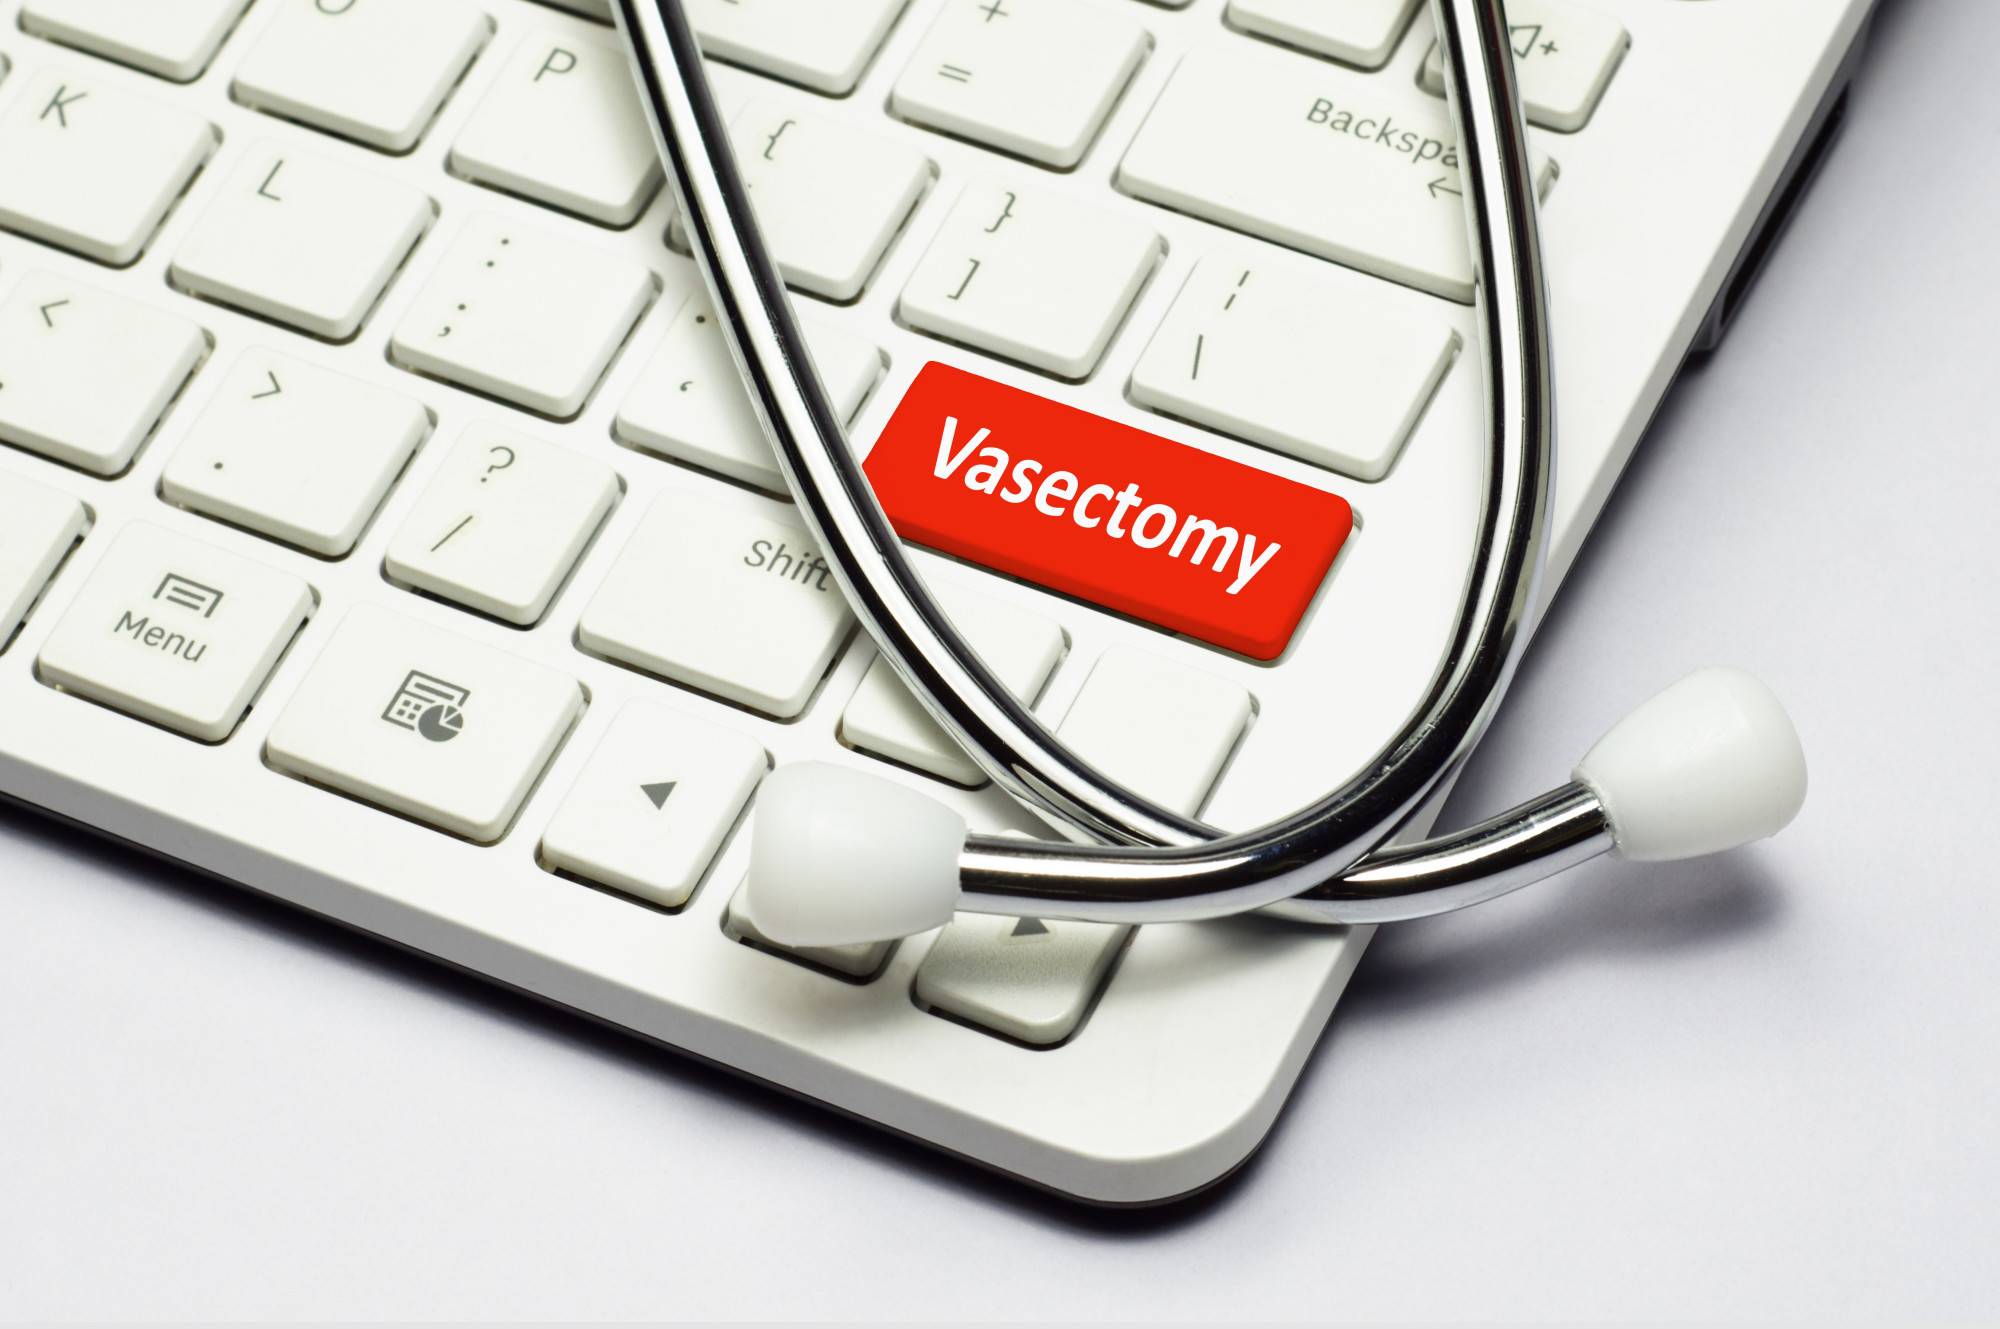 Vasectomy Recovery Tips